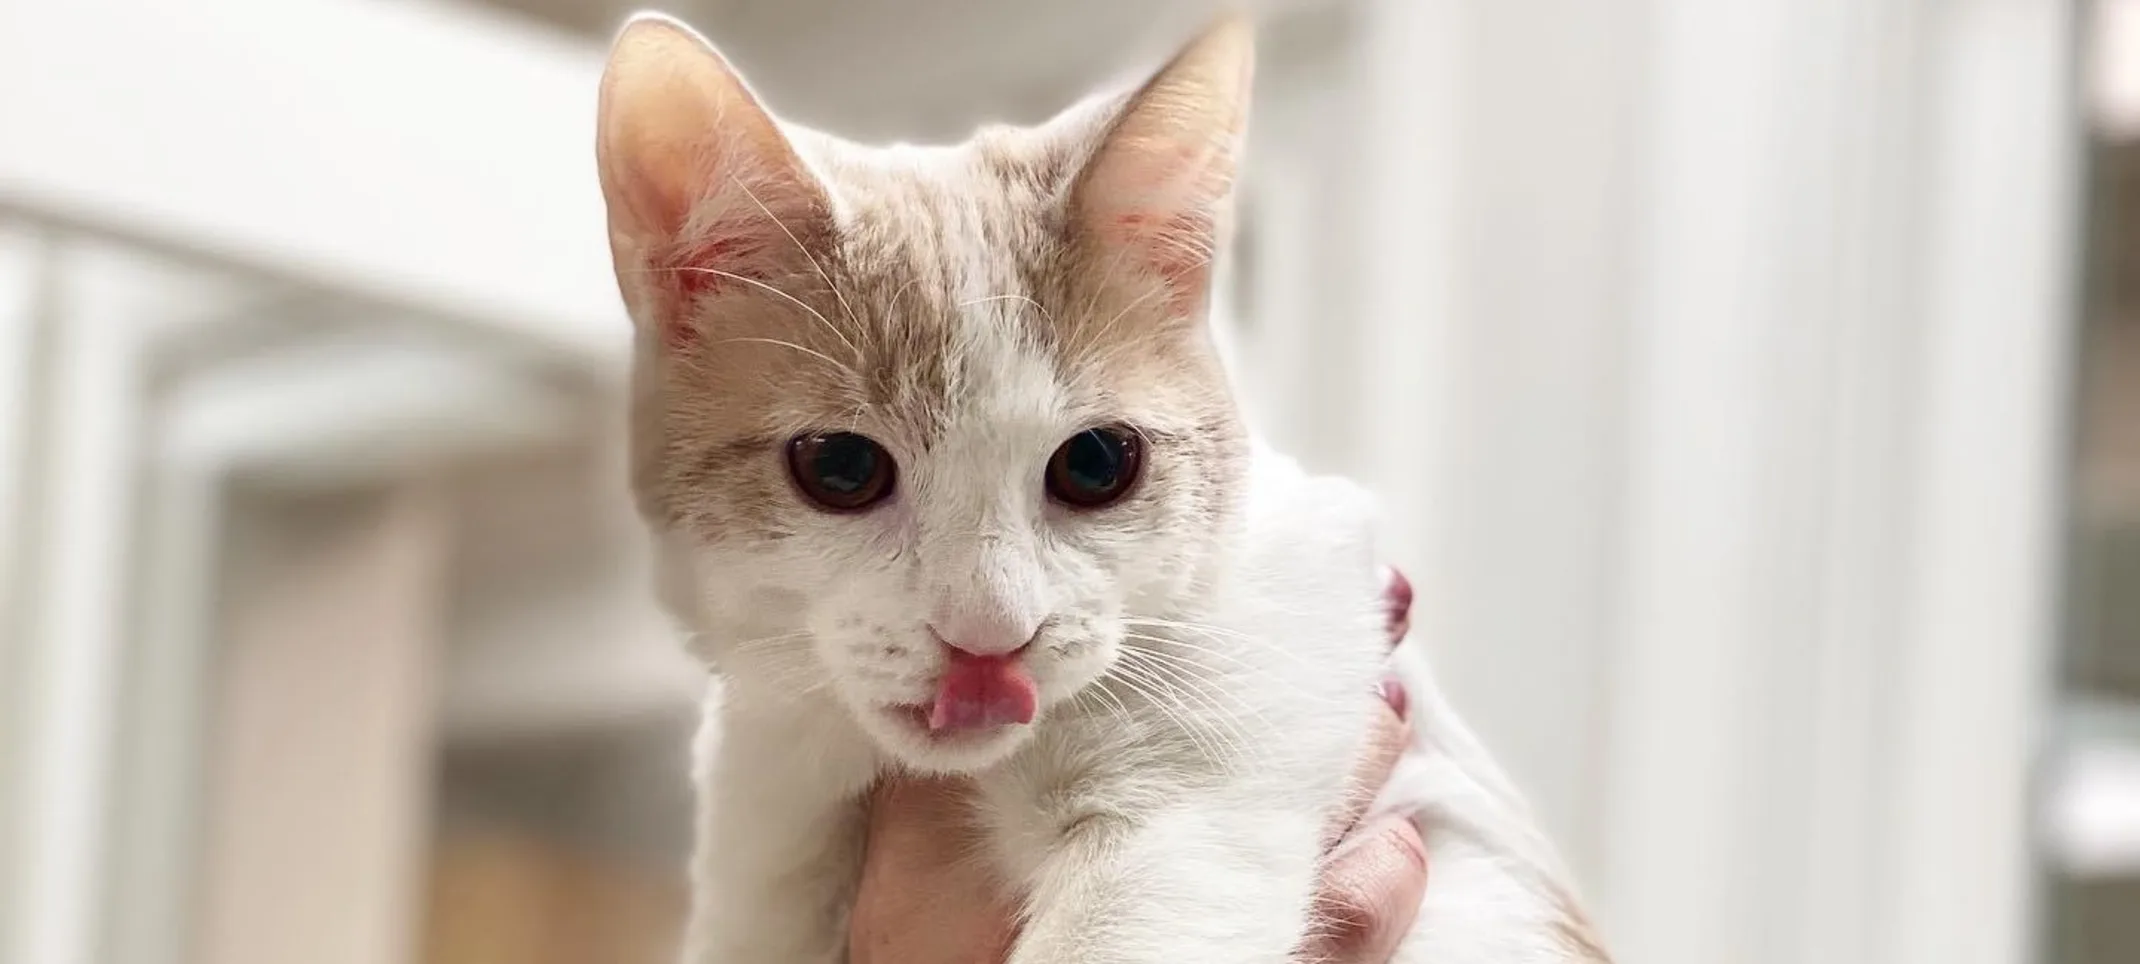 Cat being held with its tongue out